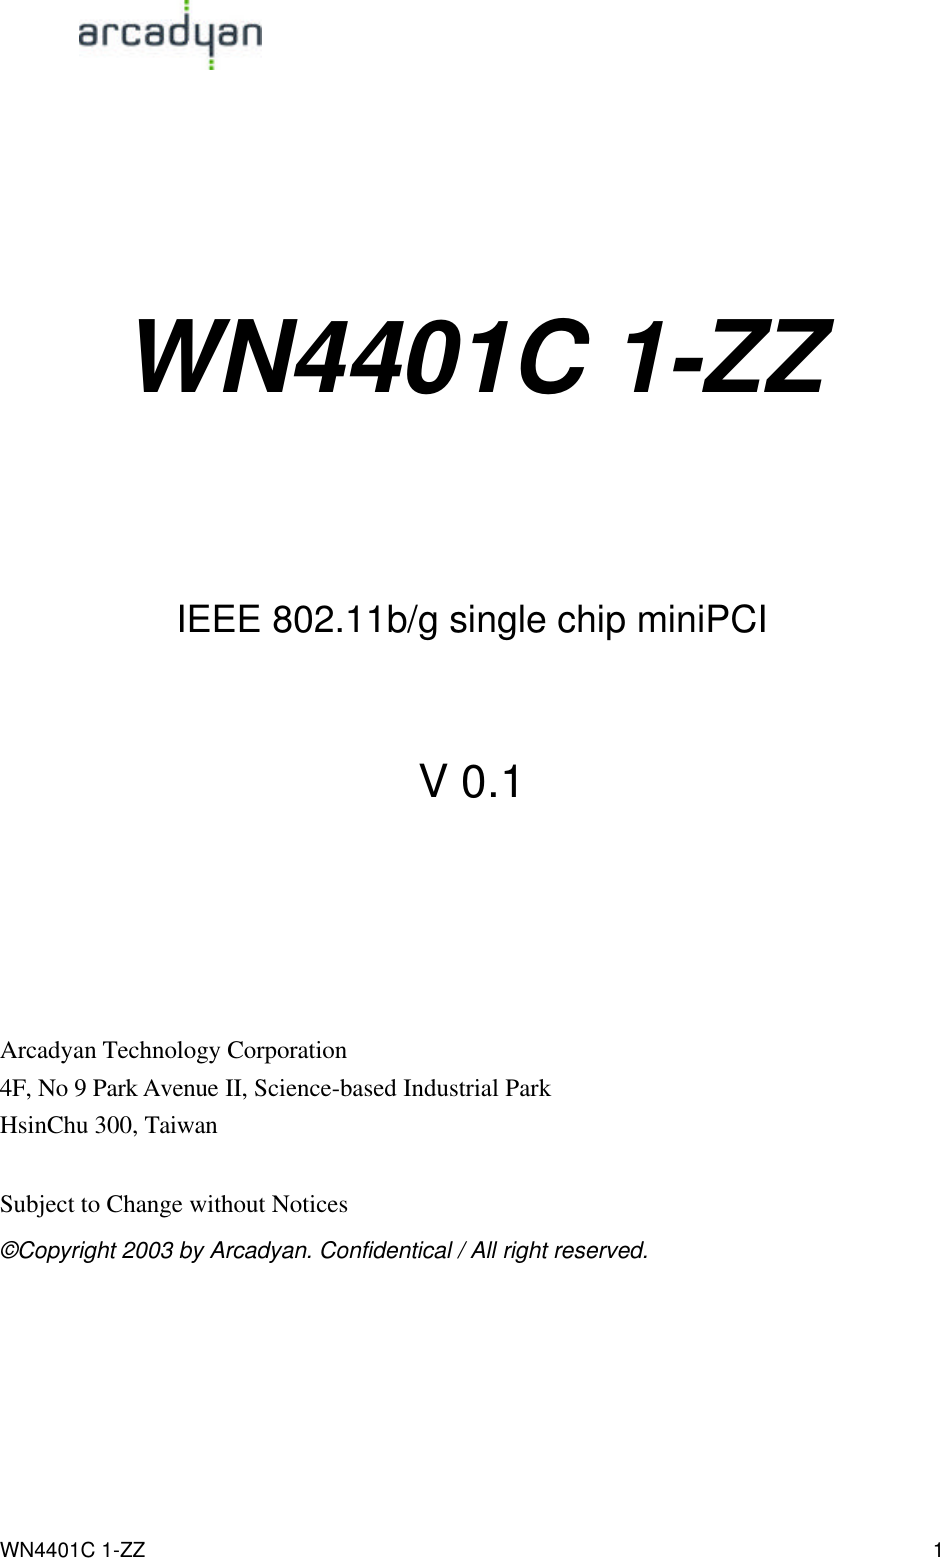                                                                                            WN4401C 1-ZZ 1   WN4401C 1-ZZ     IEEE 802.11b/g single chip miniPCI  V 0.1     Arcadyan Technology Corporation 4F, No 9 Park Avenue II, Science-based Industrial Park HsinChu 300, Taiwan  Subject to Change without Notices ©Copyright 2003 by Arcadyan. Confidentical / All right reserved. 